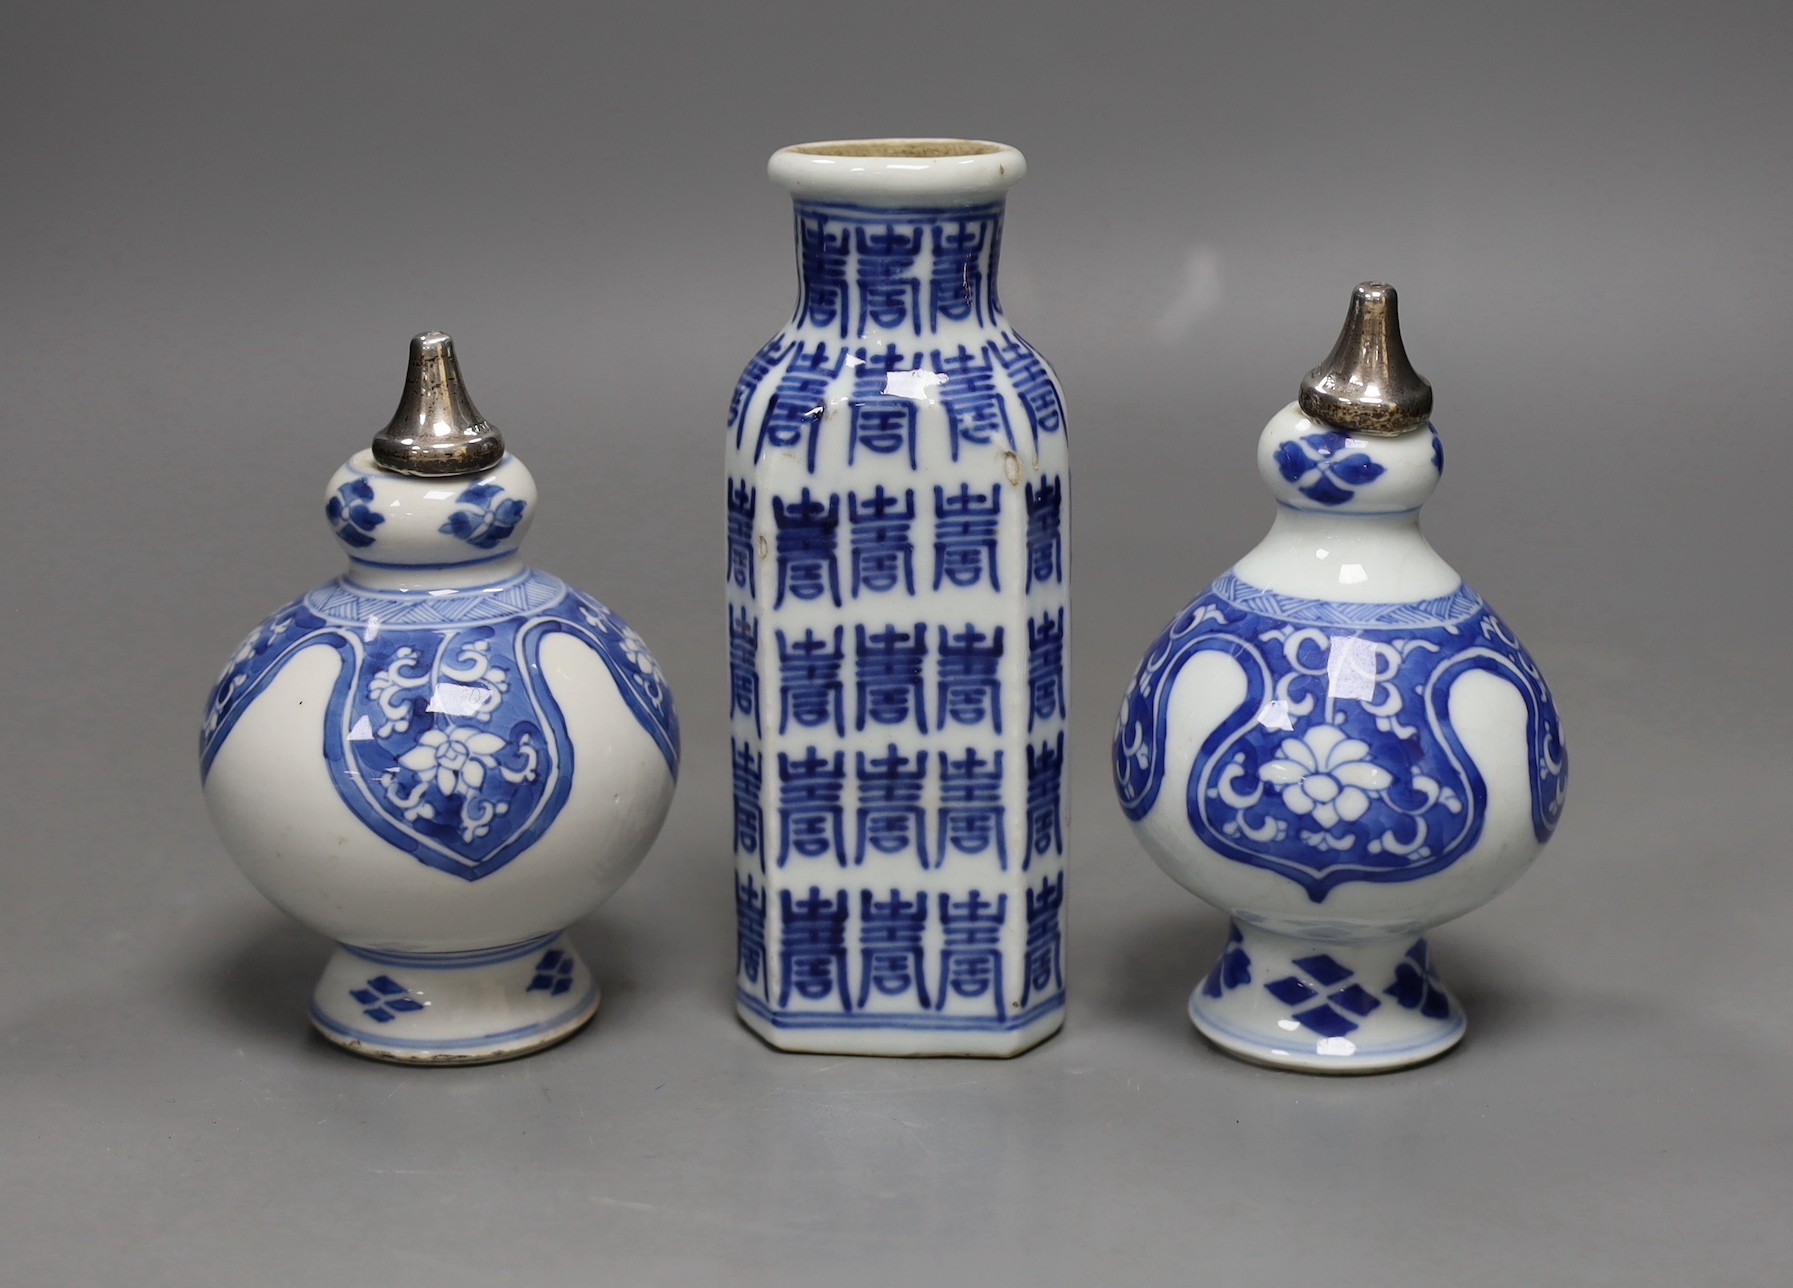 A pair of Chinese Kangxi blue and white rose water sprinklers (cut down) and an unusual 19th century Chinese blue and white ‘Hundred Shou’ jar, rose sprinklers: 10cms high excluding metal tops